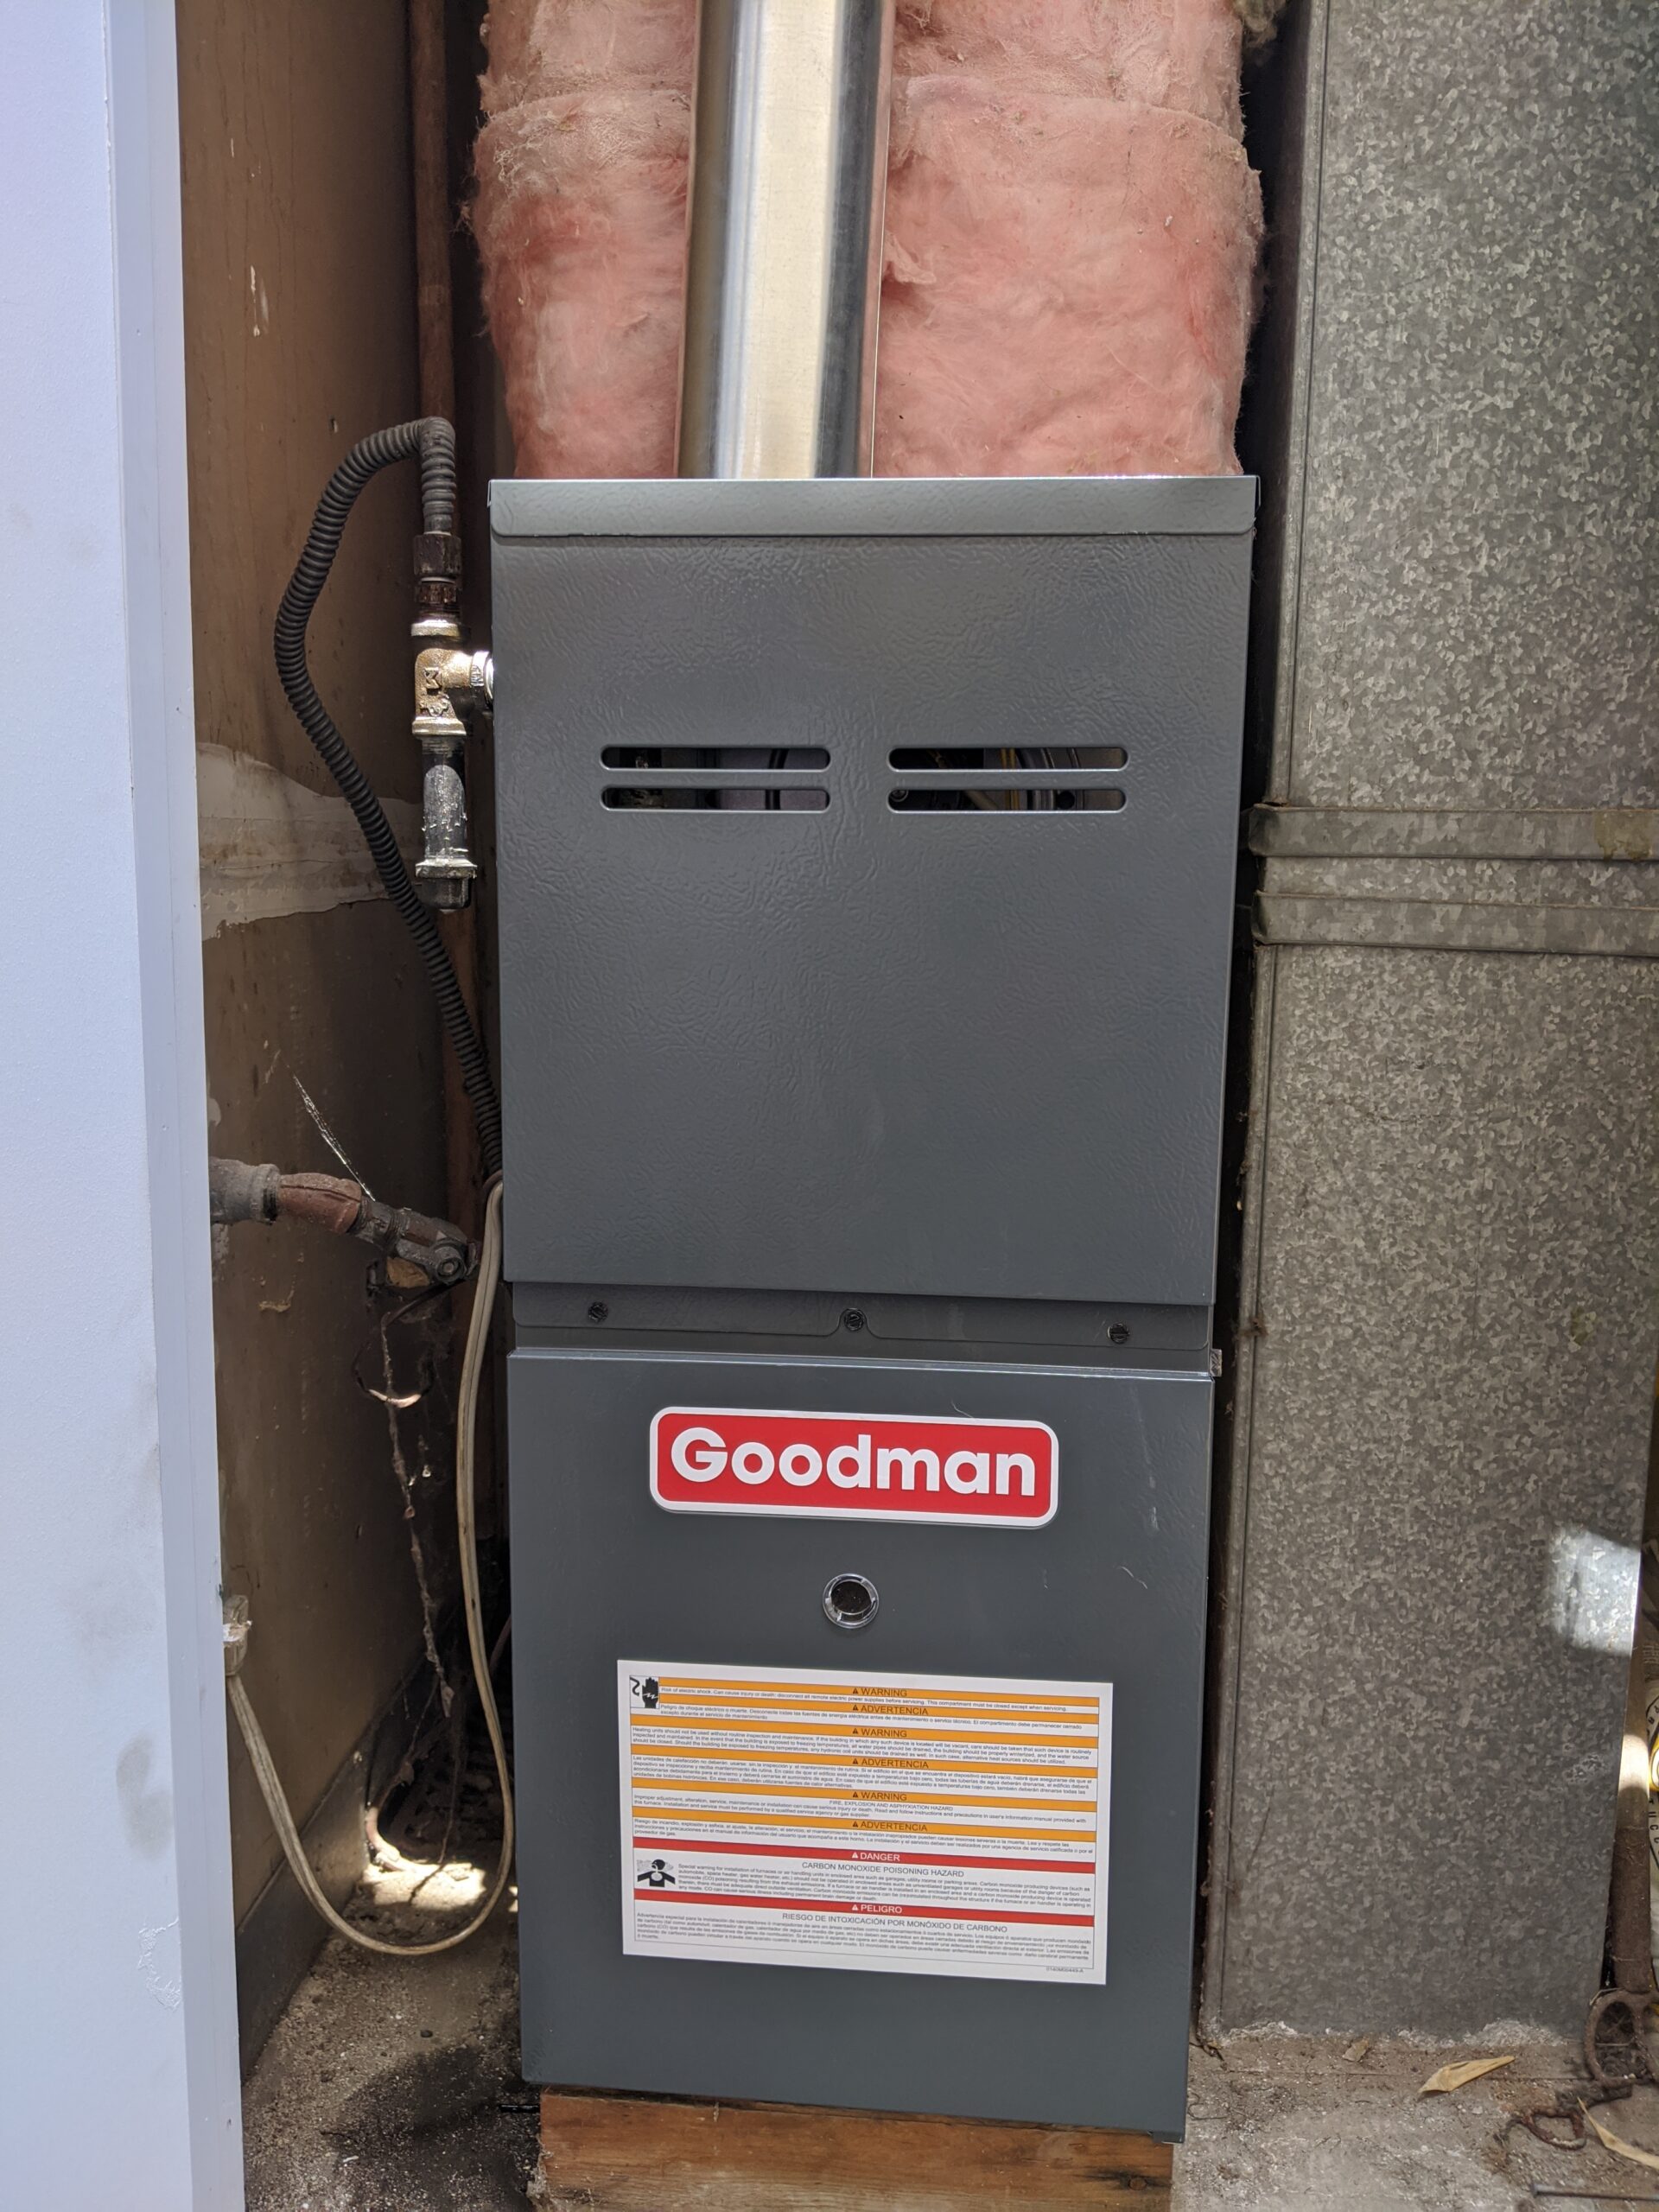 Goodman gas furnace installed by Accord Air